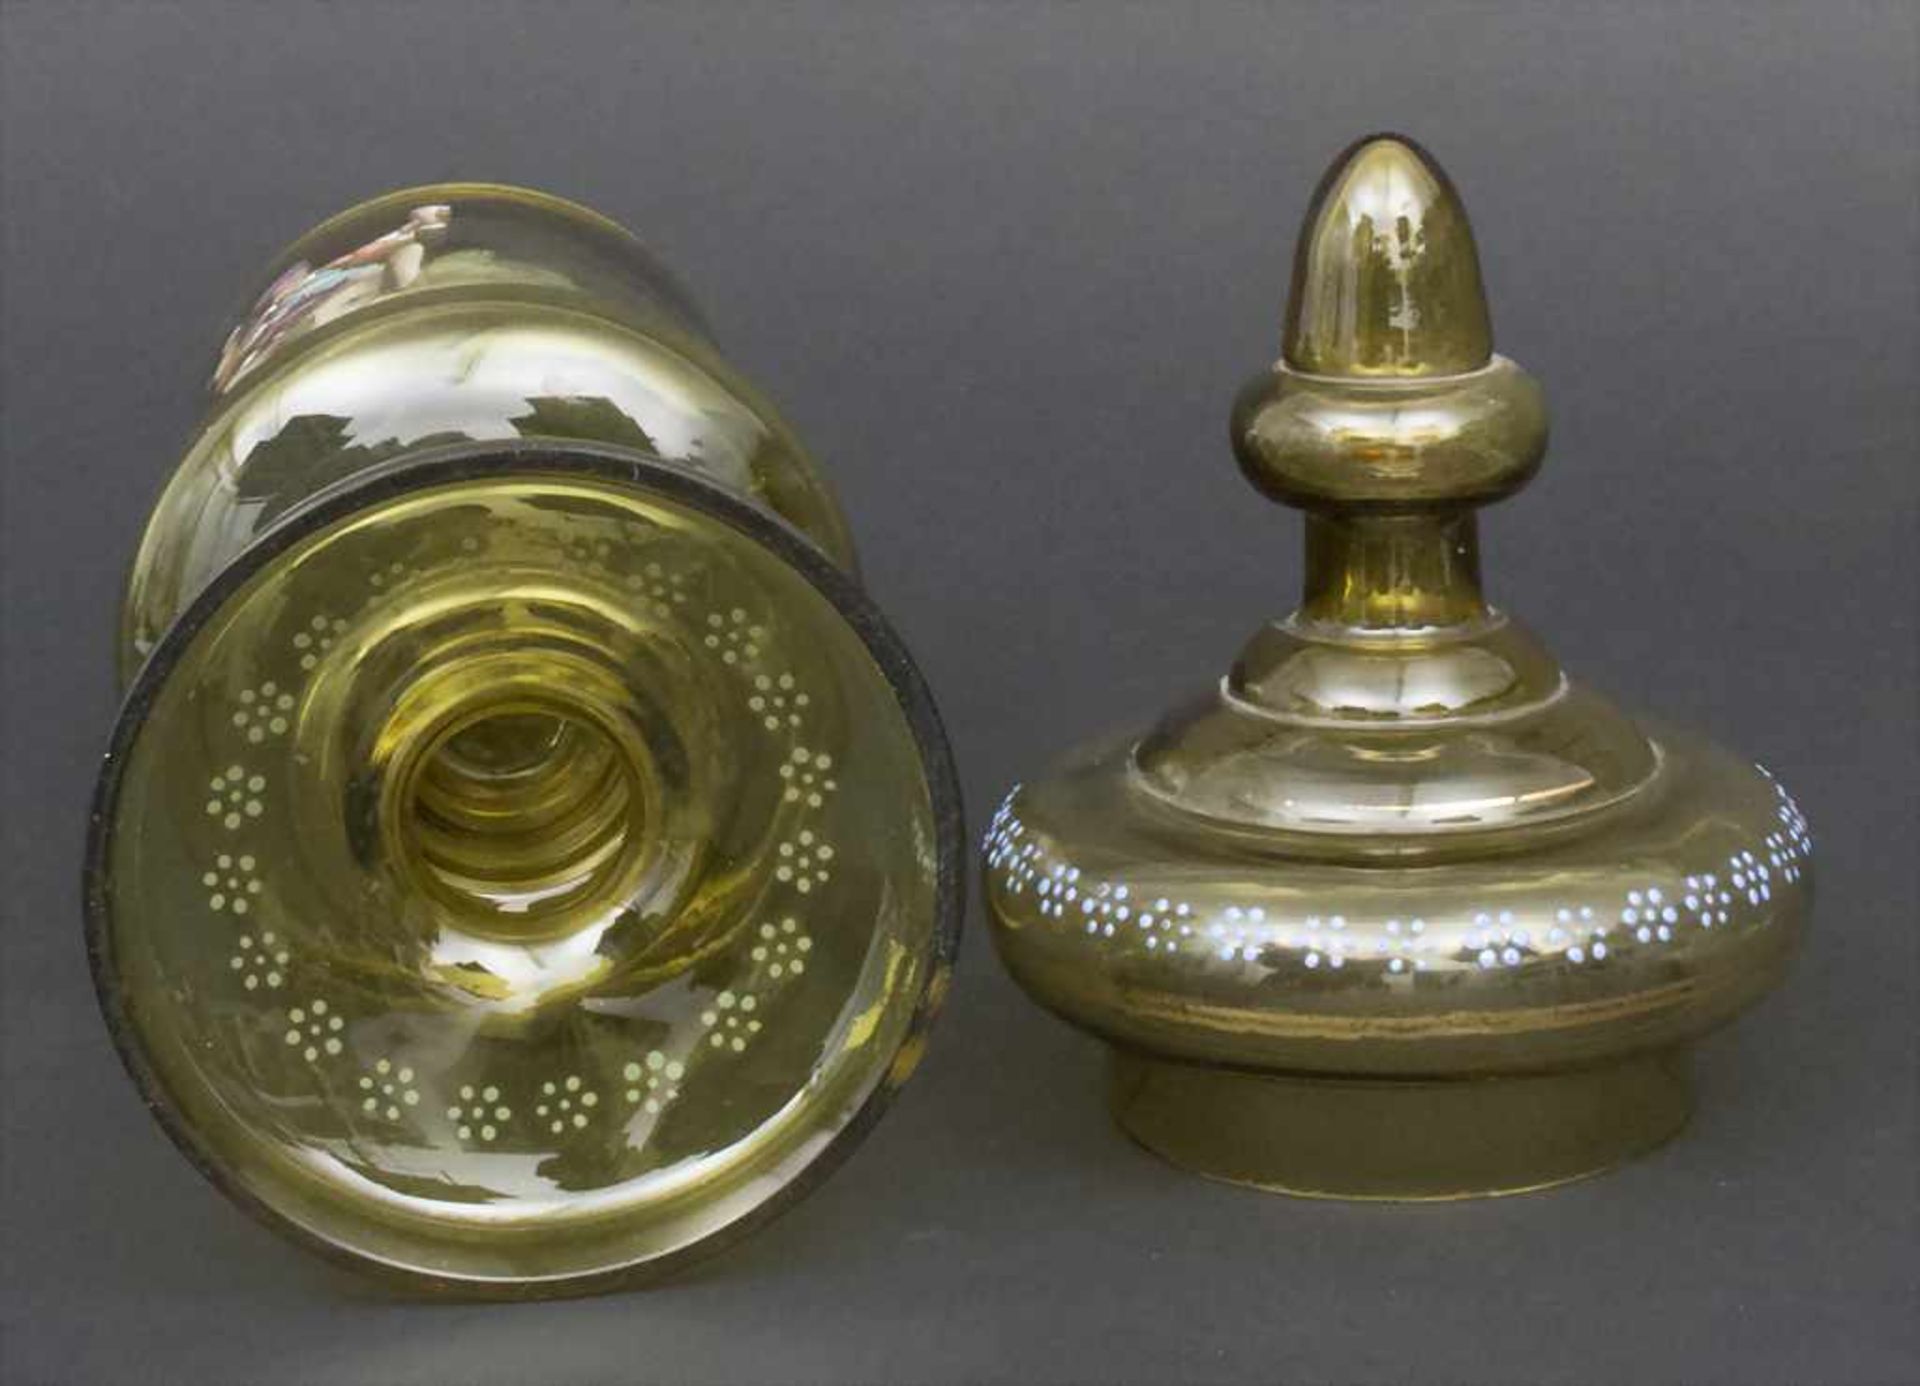 Deckelpokal mit Figurenmalerei / A covered goblet with figural painting, Ende 19. Jh.Material: - Bild 3 aus 3